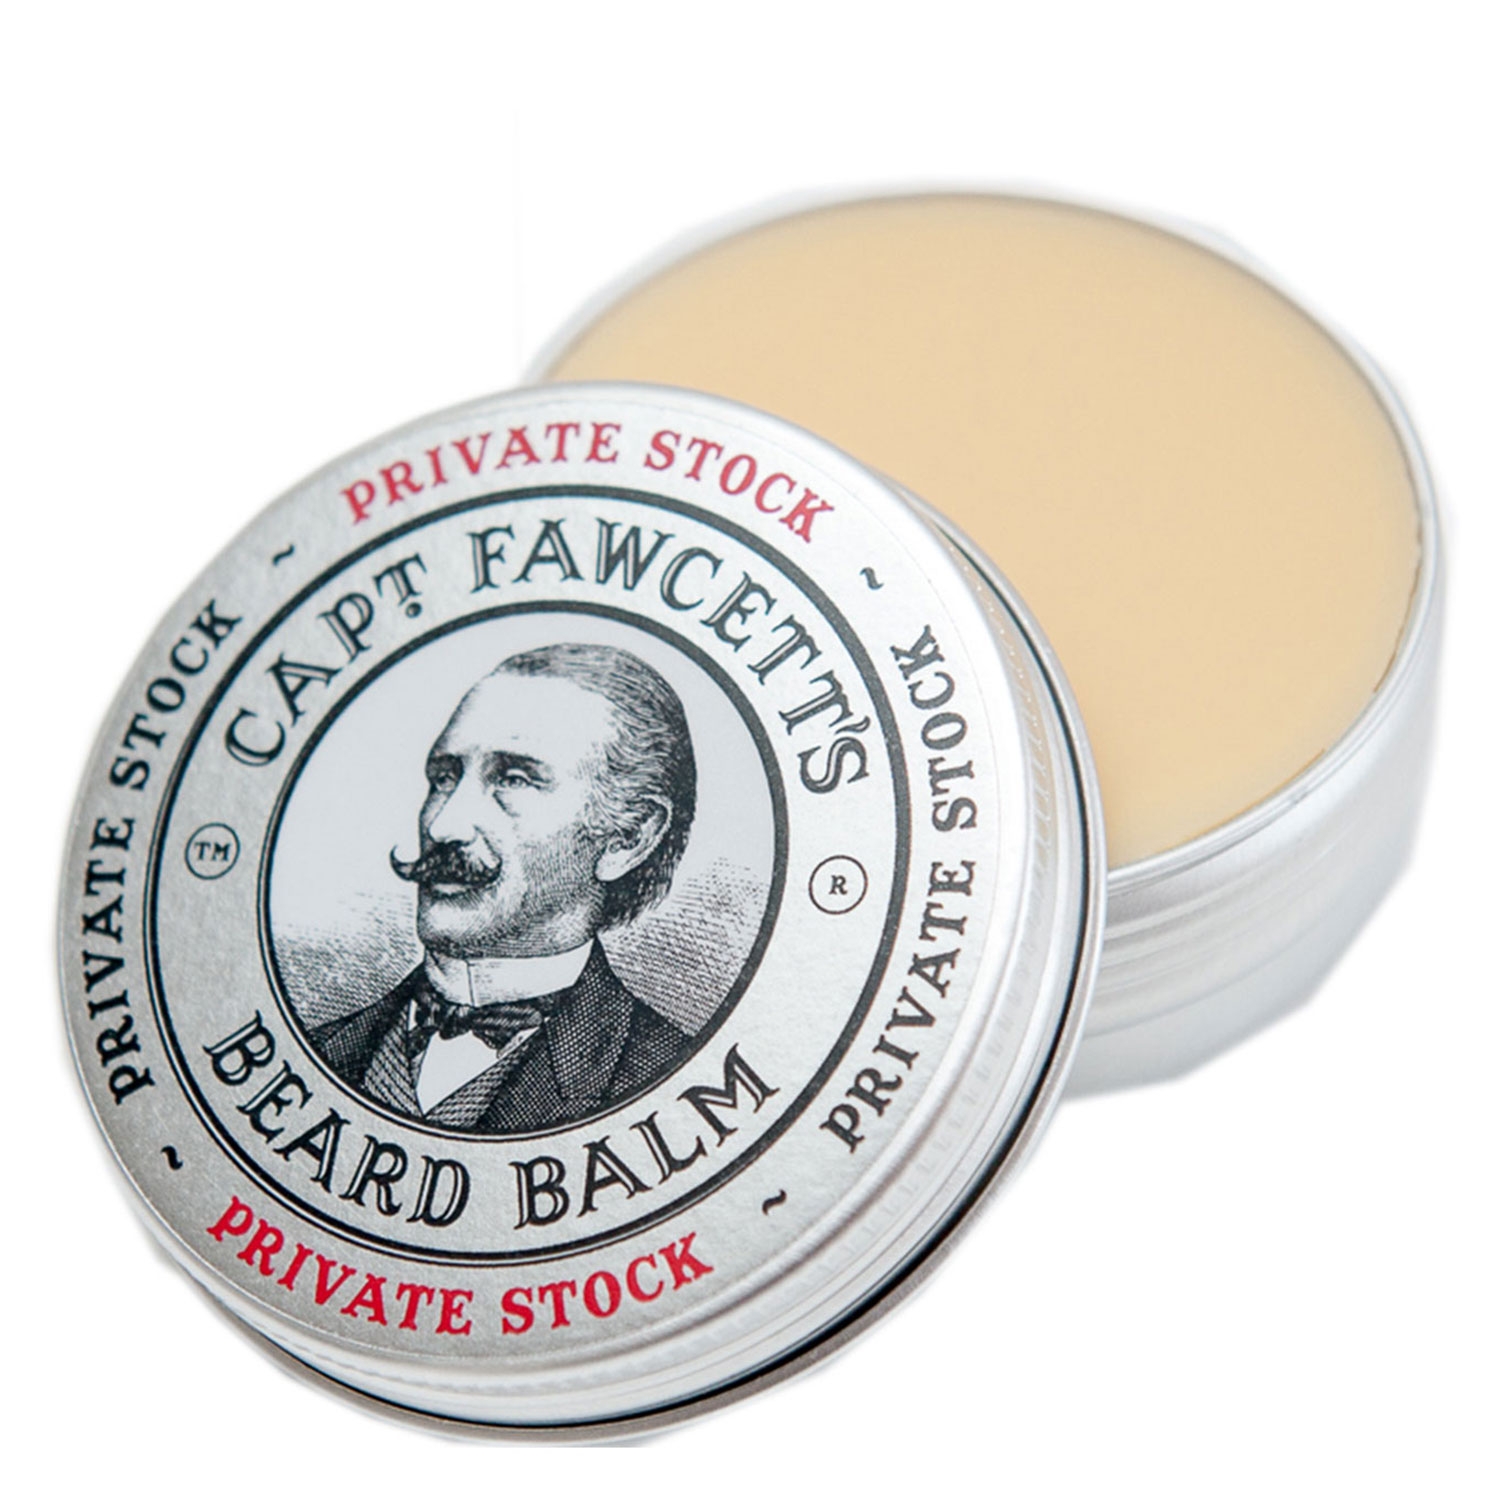 Product image from Capt. Fawcett Care - Private Stock Beard Balm